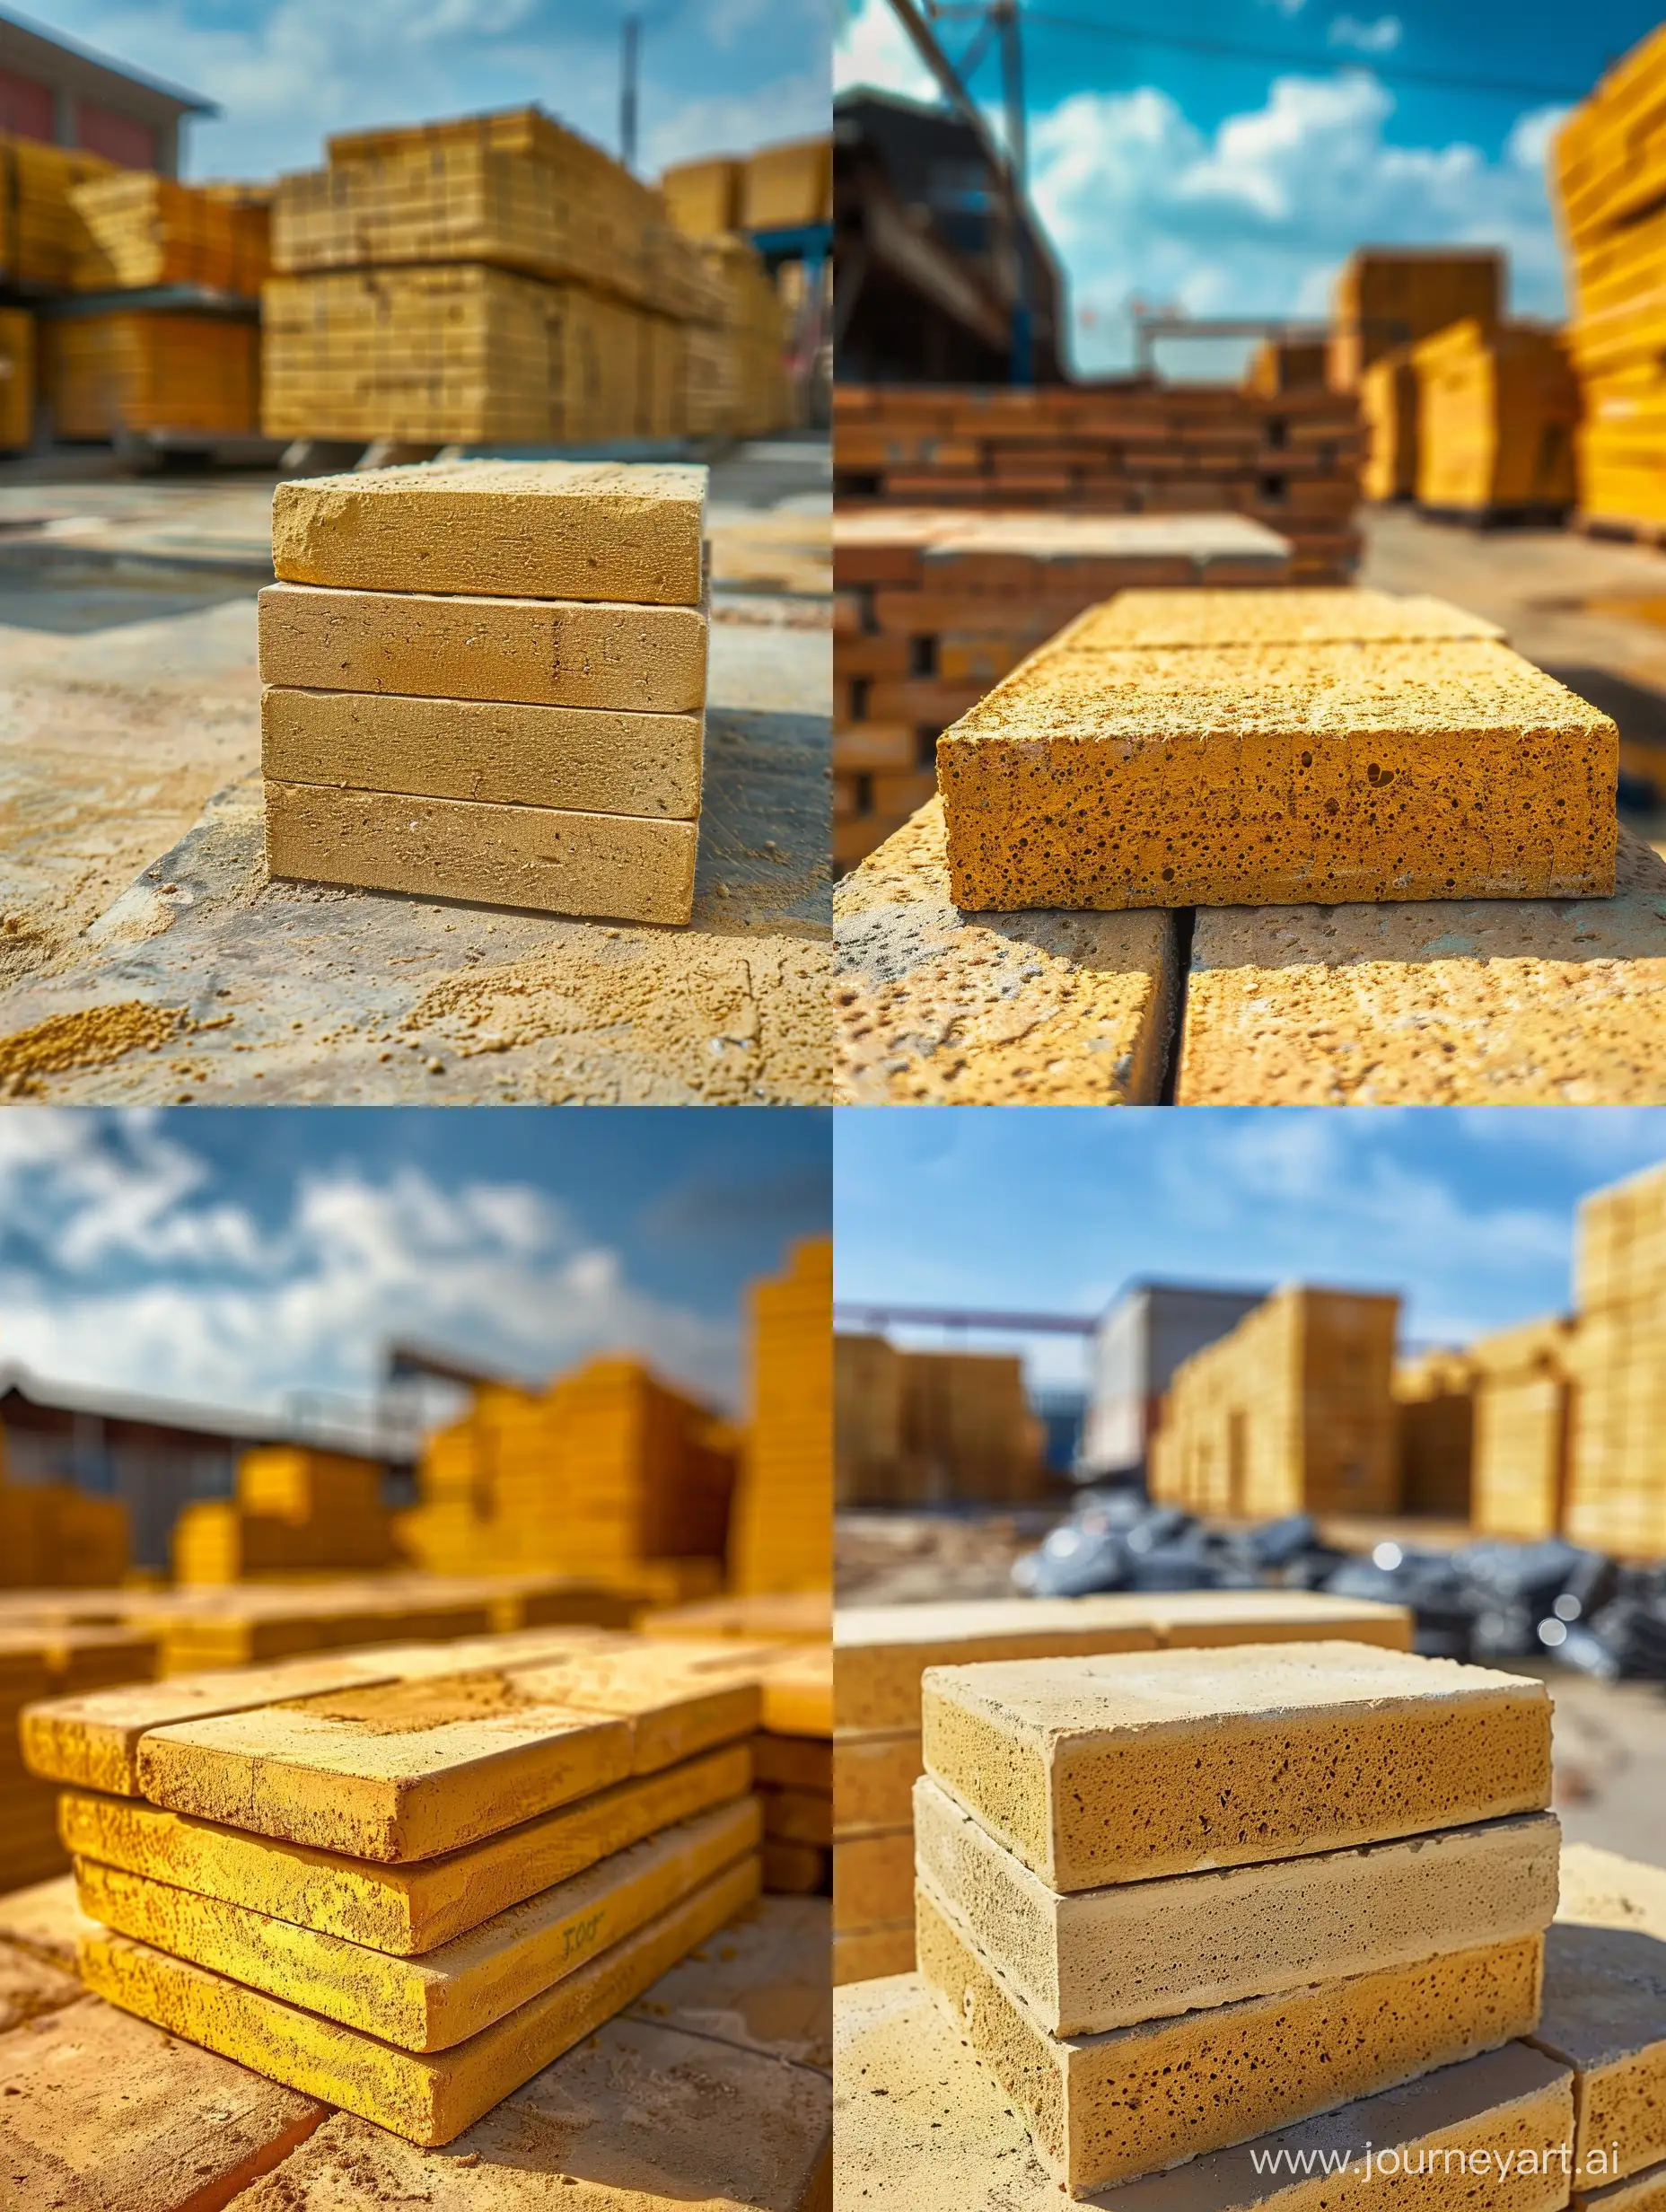 a  stack of yellow normal brick placed on each other, a close up photo, background is a brick factory  and stacks of bricks blurred out